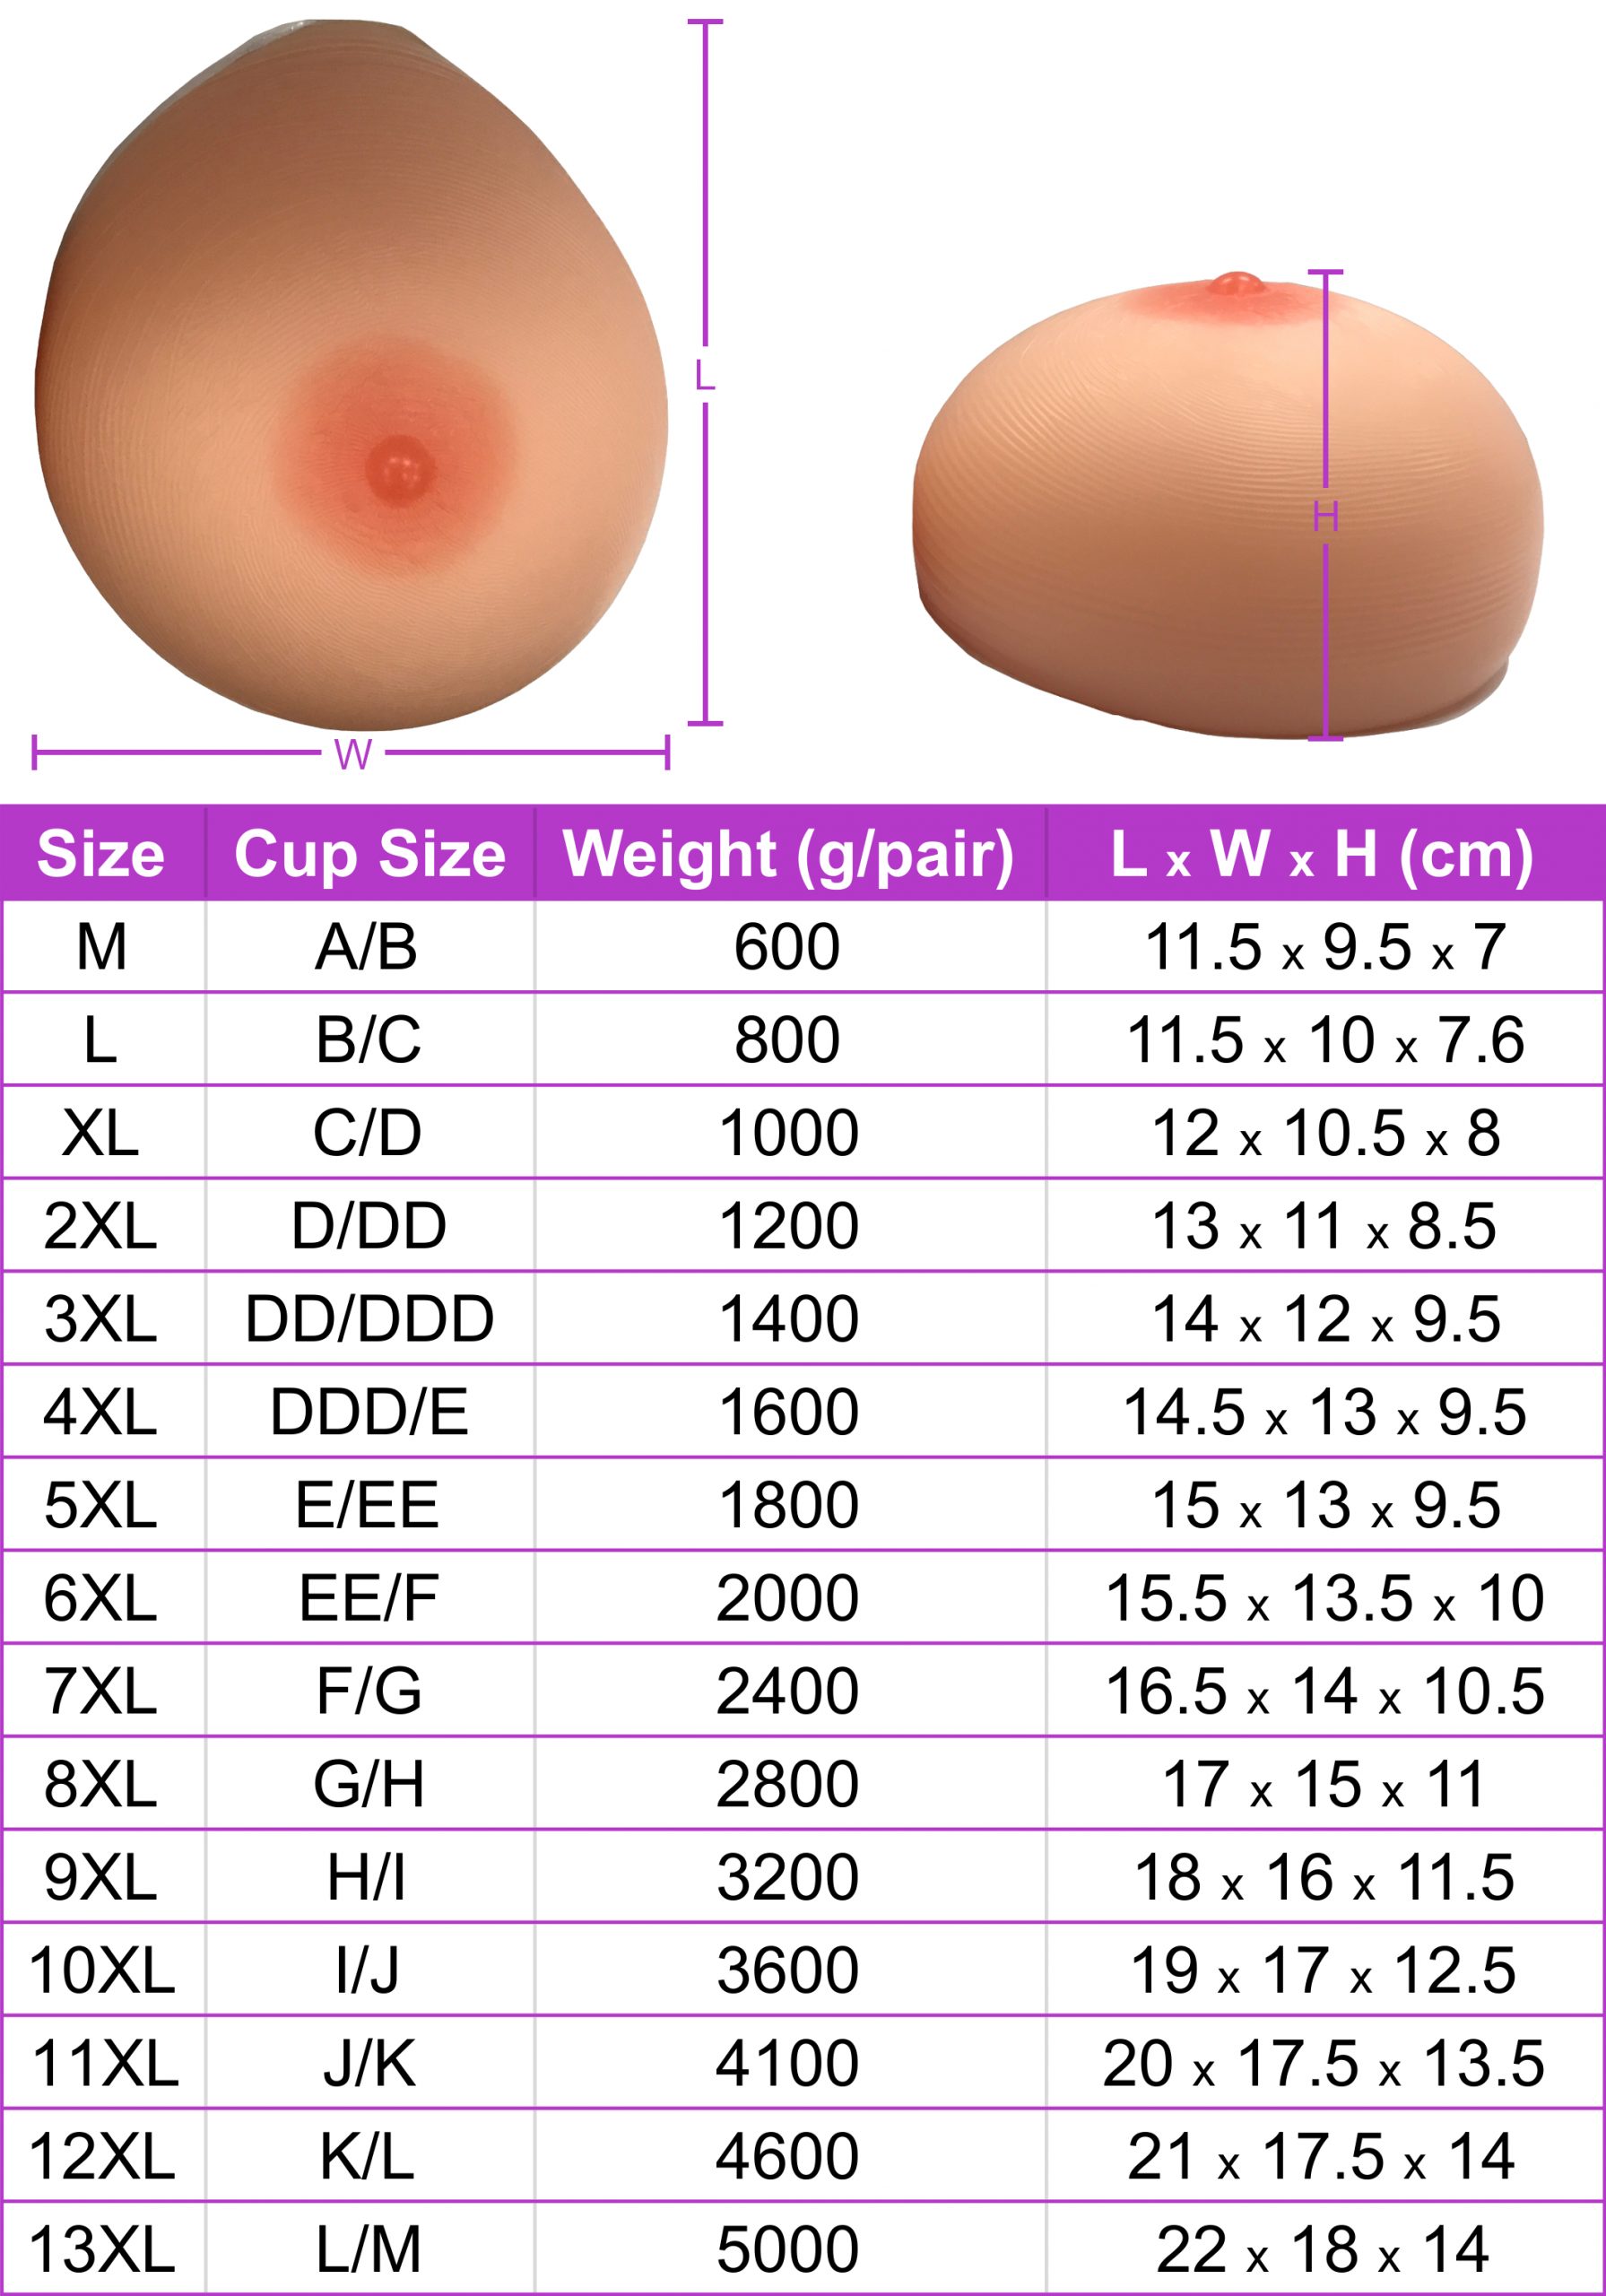 Vollence Strap on Silicone Breast Forms Fake Boobs